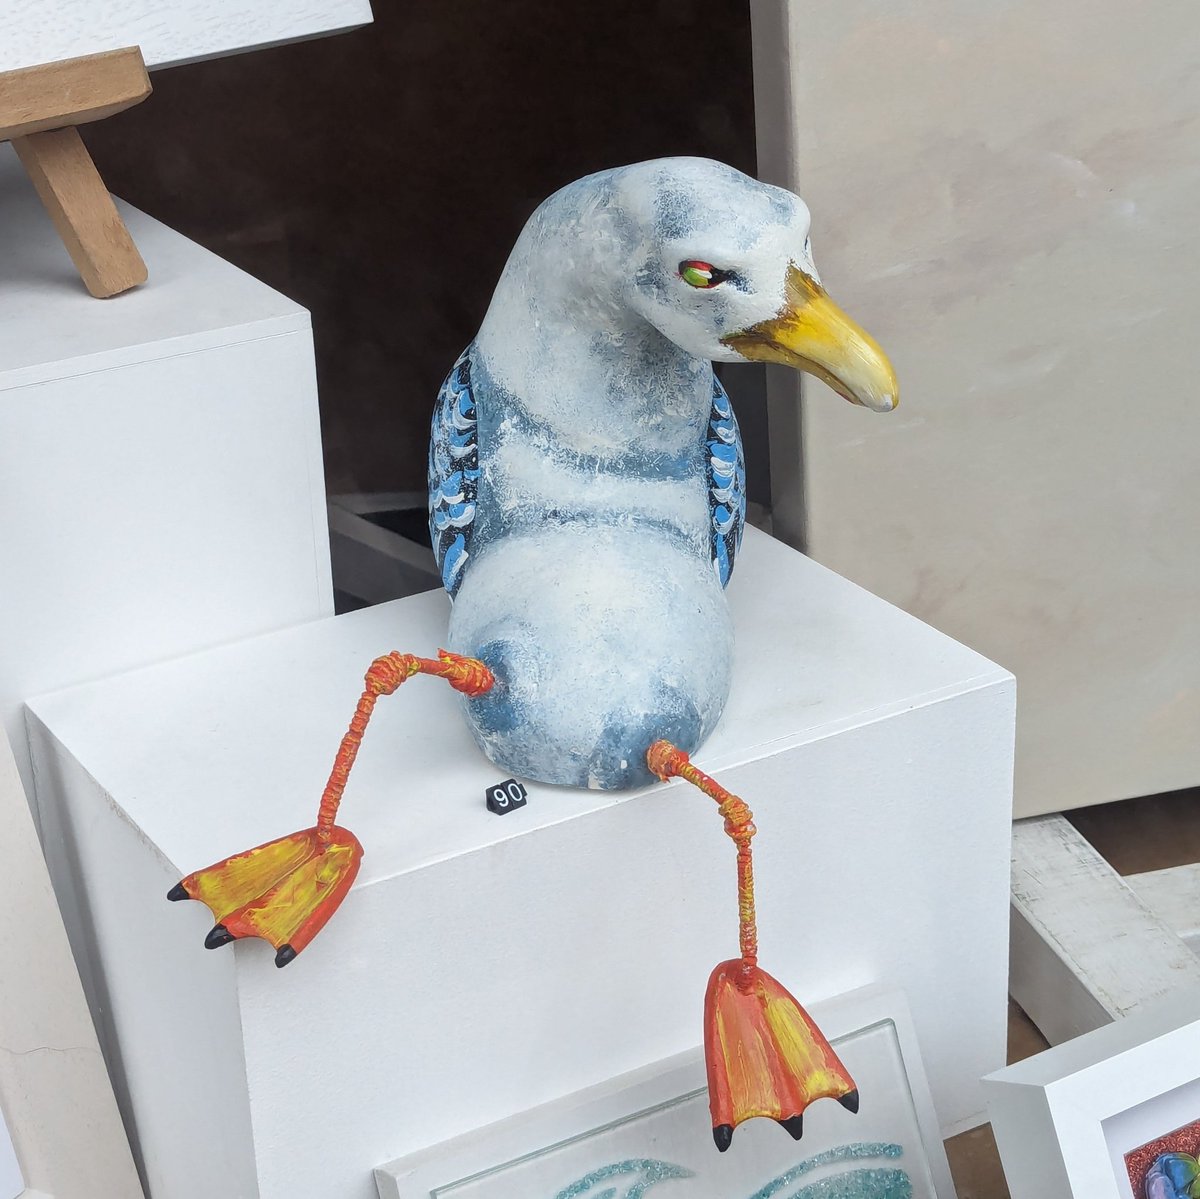 Saw this angry gull in a gallery window today and honestly I kinda want him